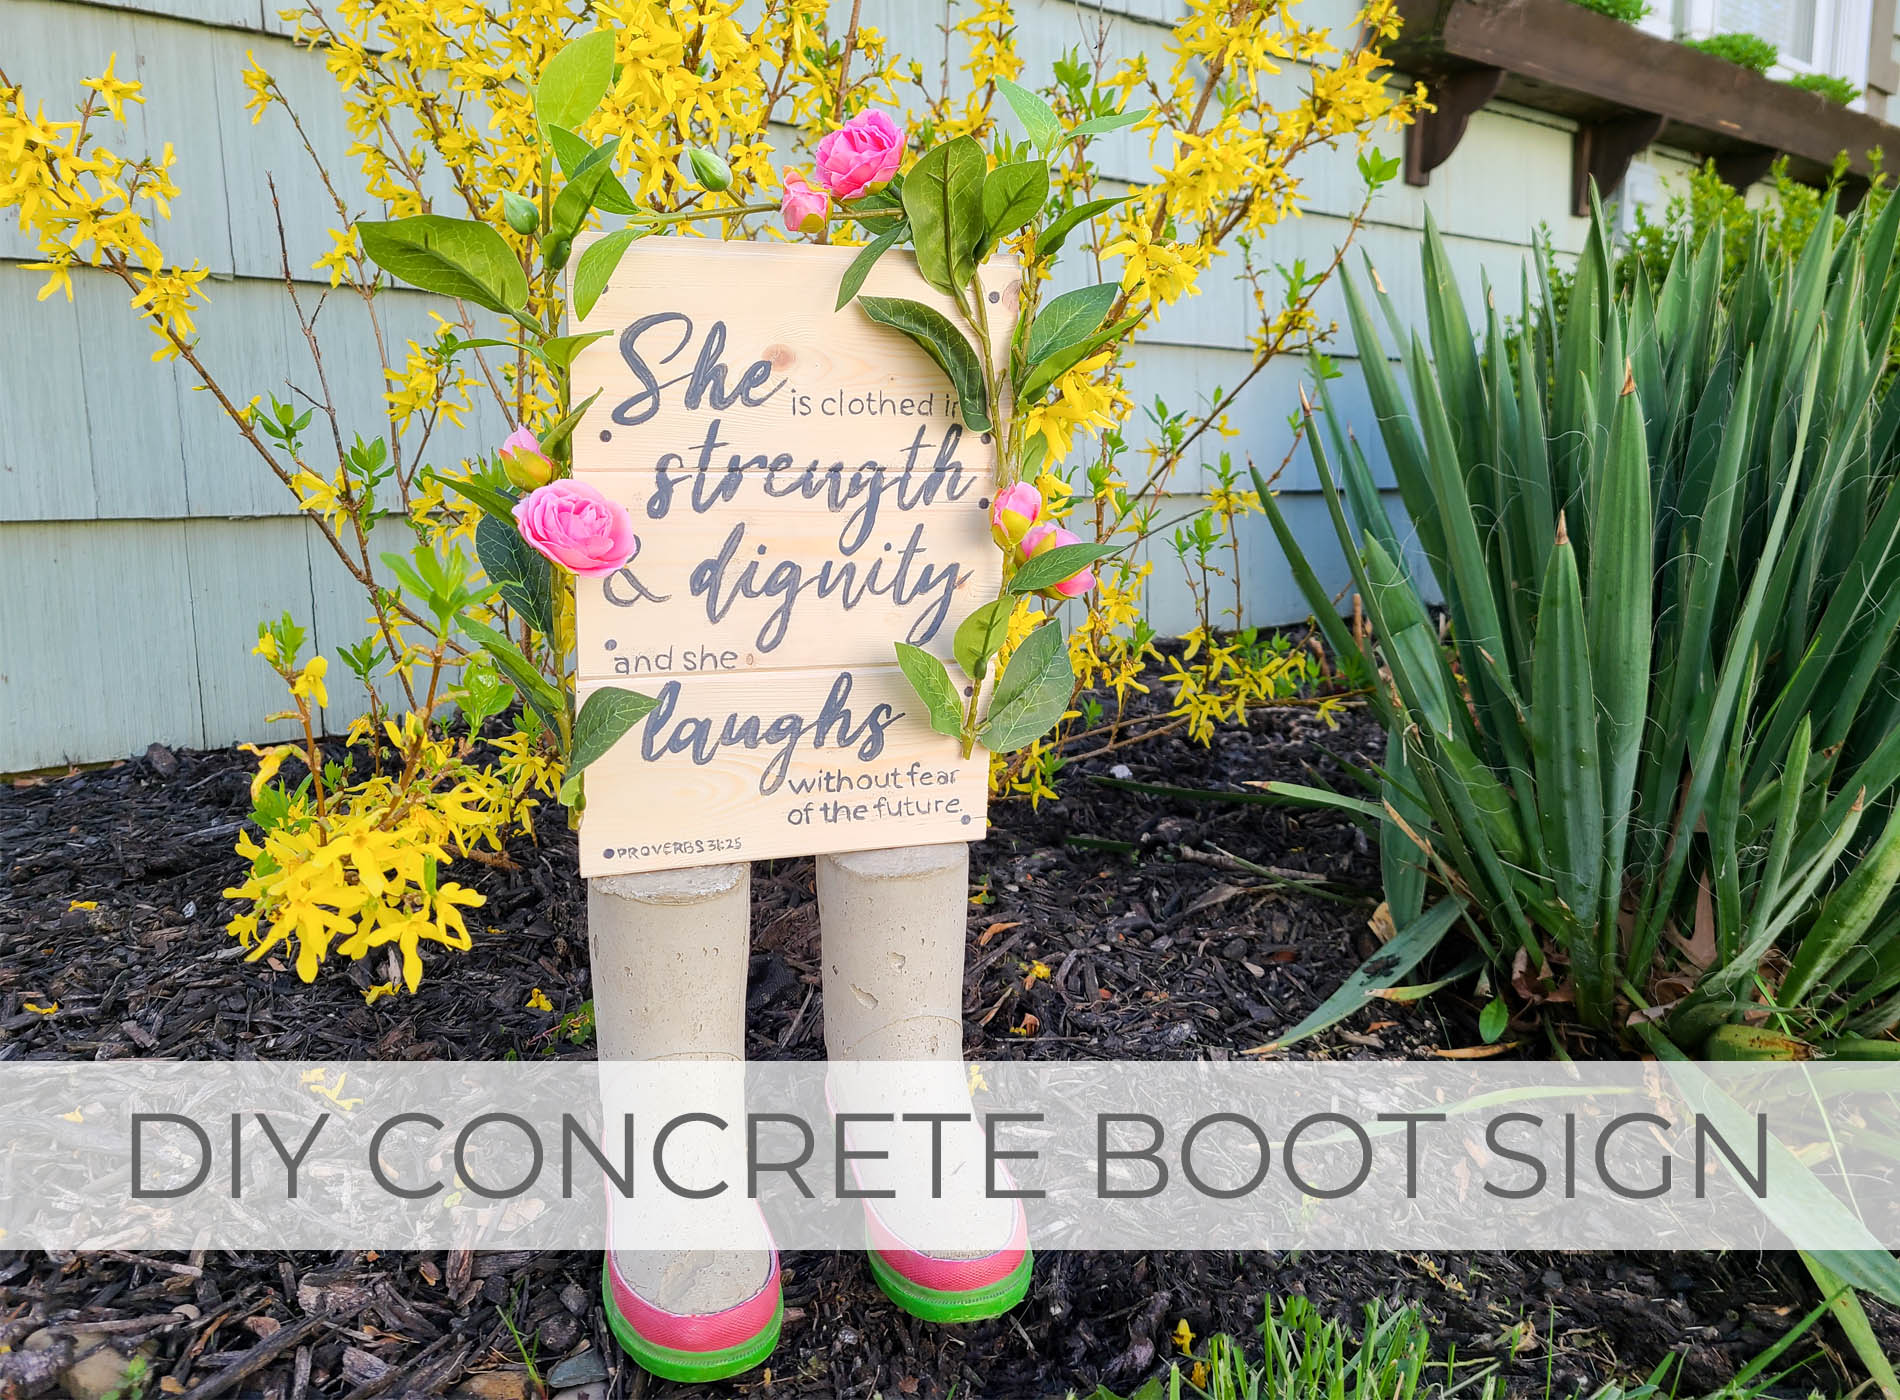 DIY Concrete Boot Sign Tutorial by Larissa of Prodigal Pieces | prodigalpieces.com #prodigalpieces